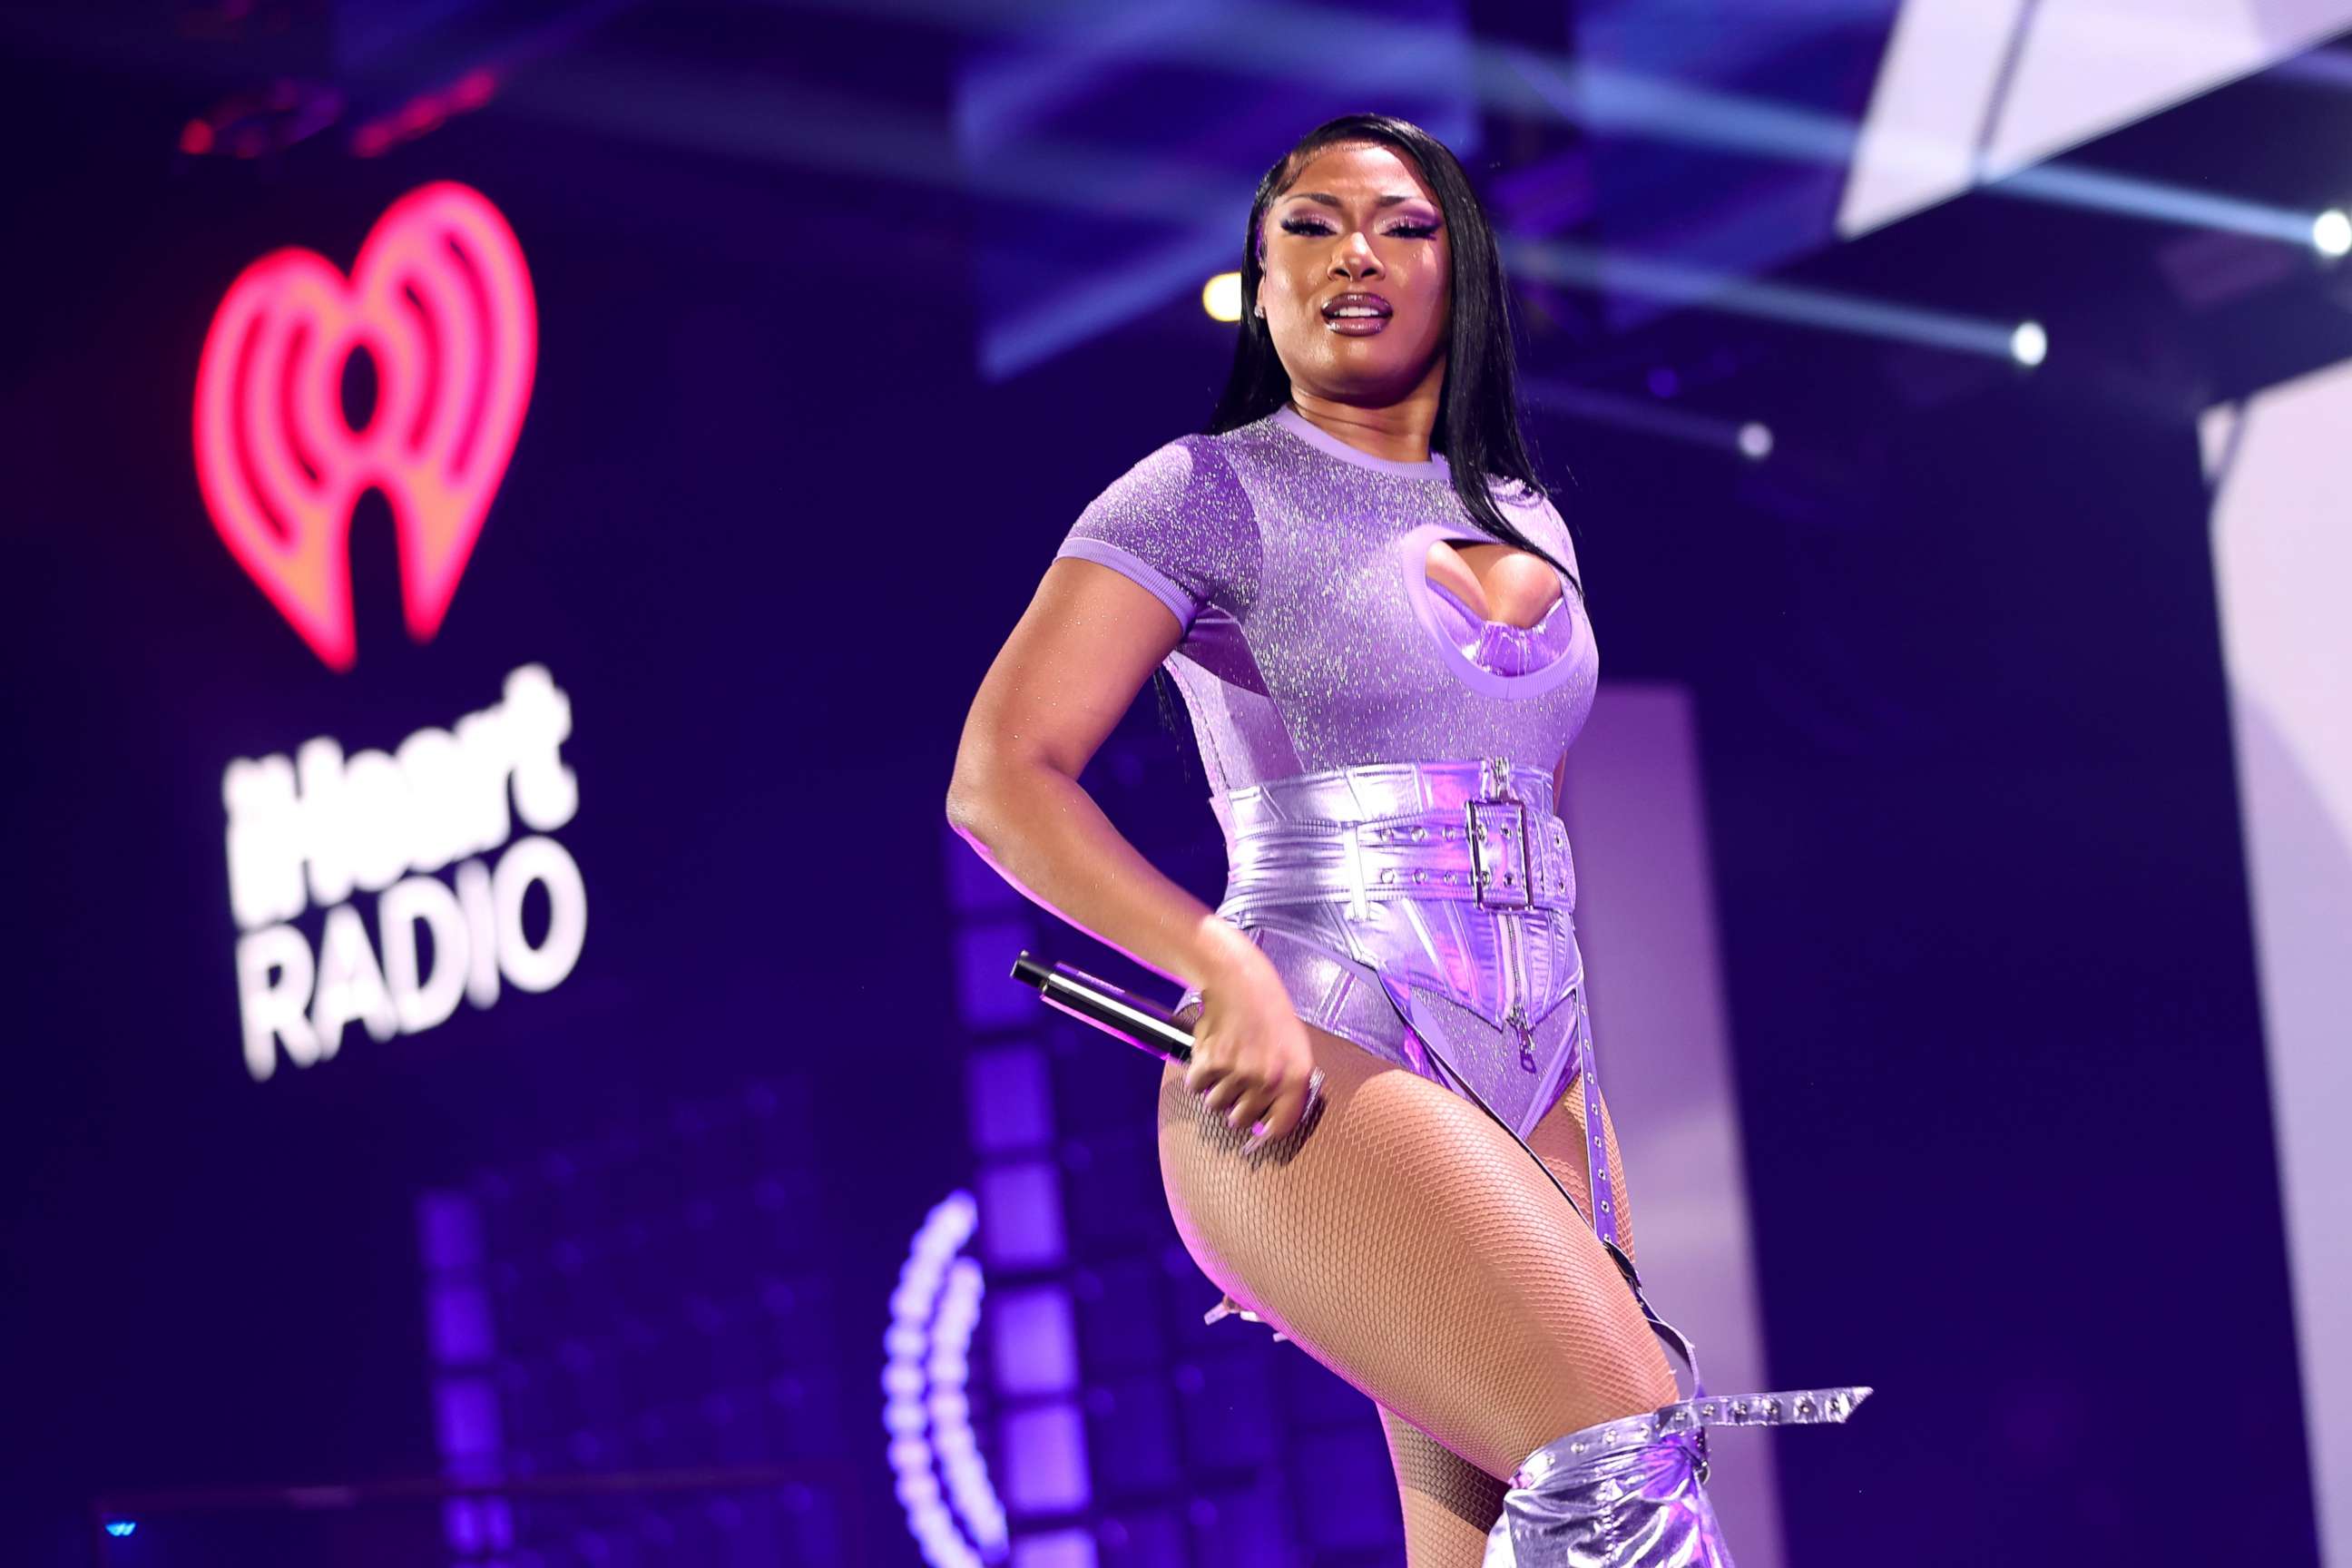 PHOTO: Megan Thee Stallion performs onstage during the 2022 iHeartRadio Music Festival at T-Mobile Arena on September 24, 2022 in Las Vegas.